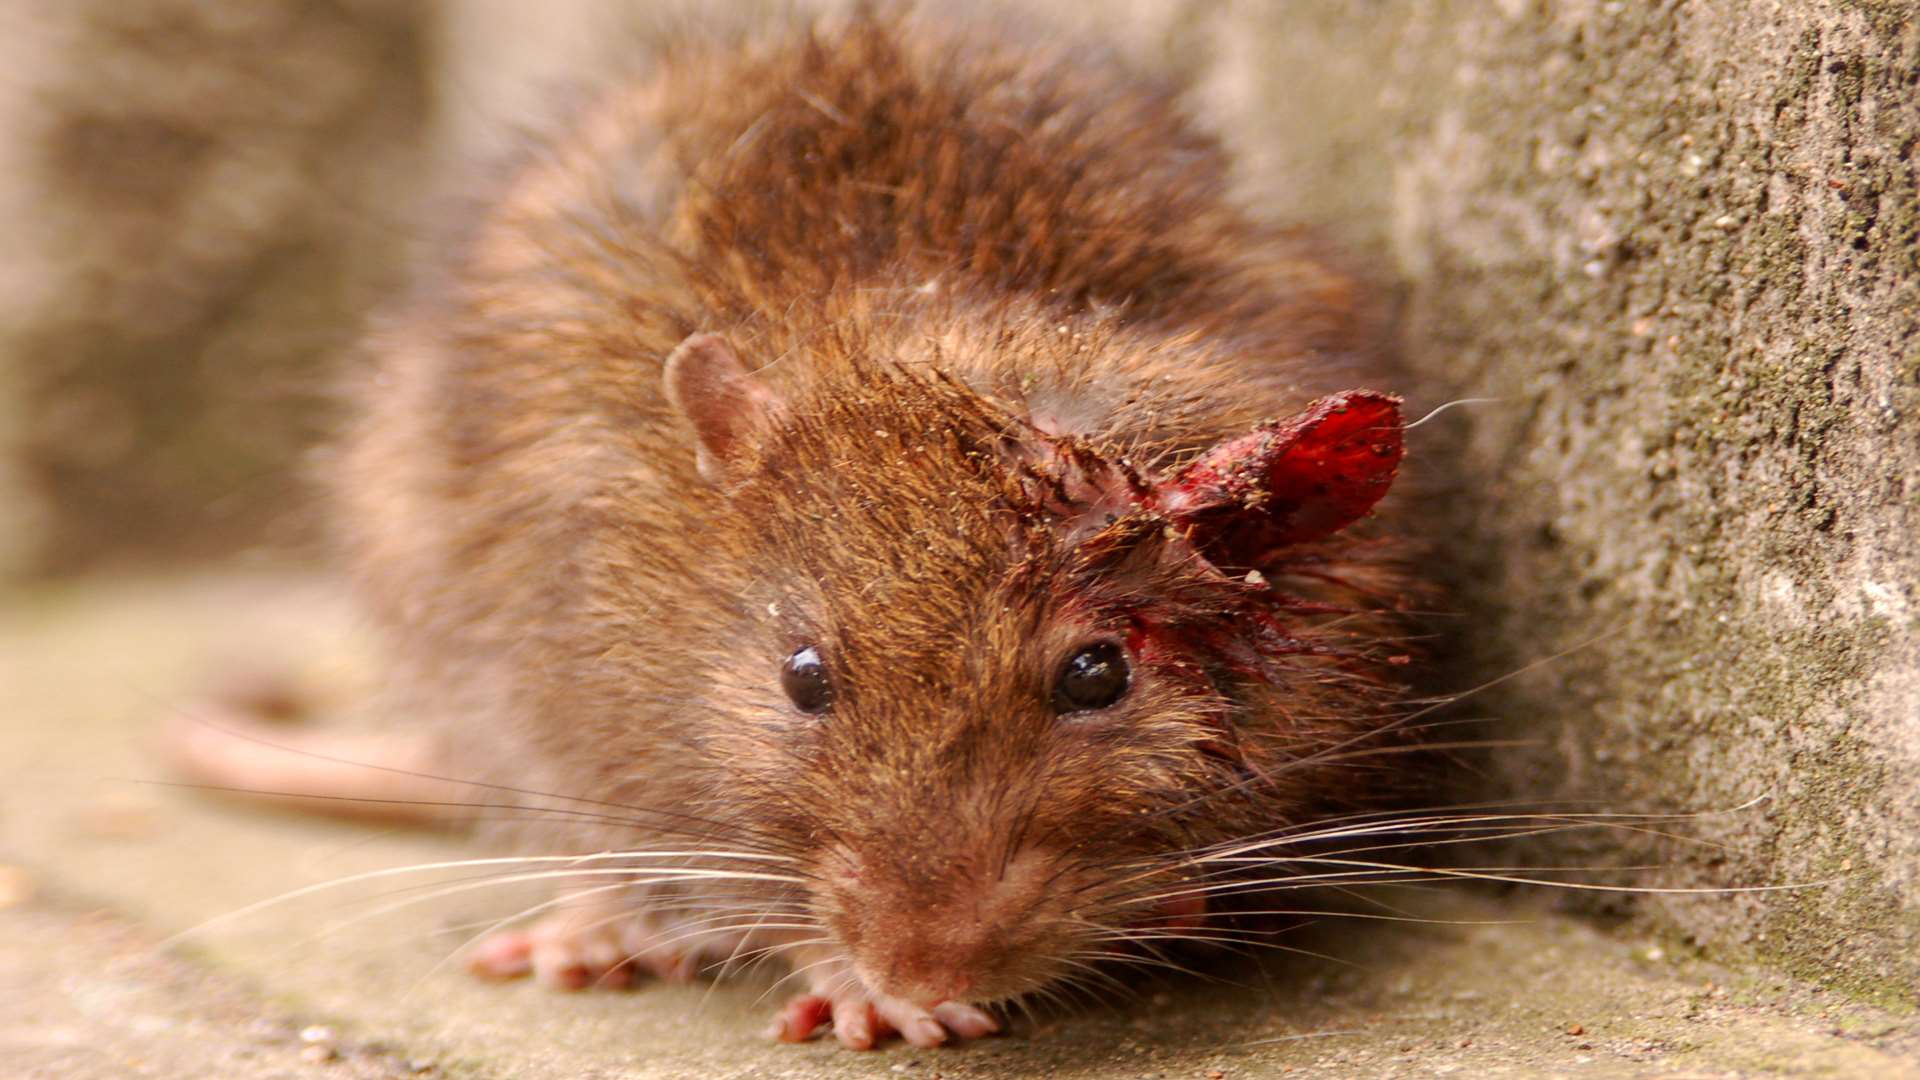 Rats have been seen near to where rubbish is dumped. Thinkstock Image